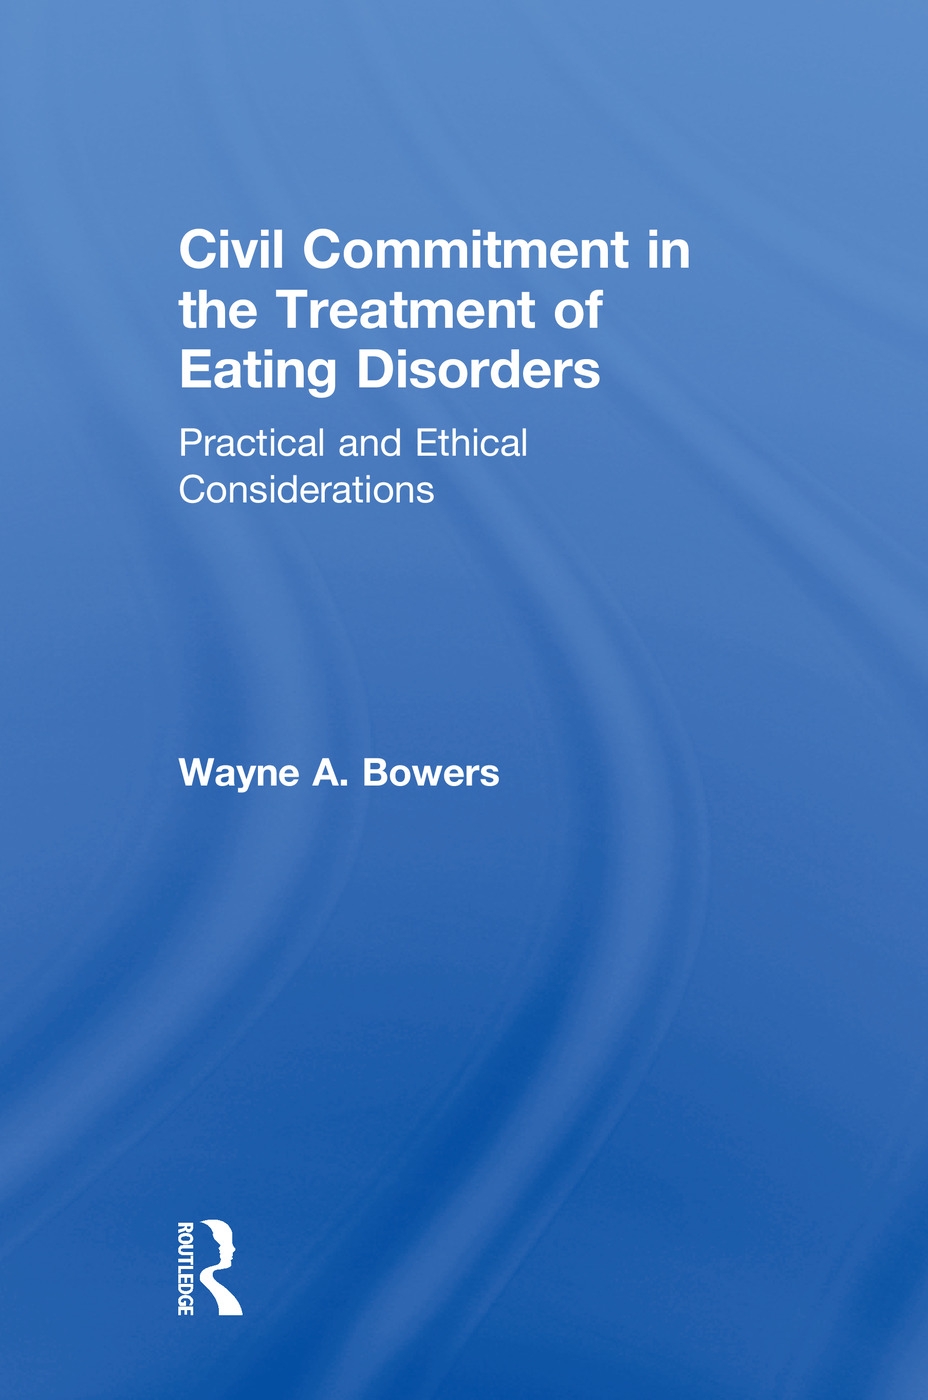 Civil Commitment in the Treatment of Eating Disorders: Practical and Ethical Considerations